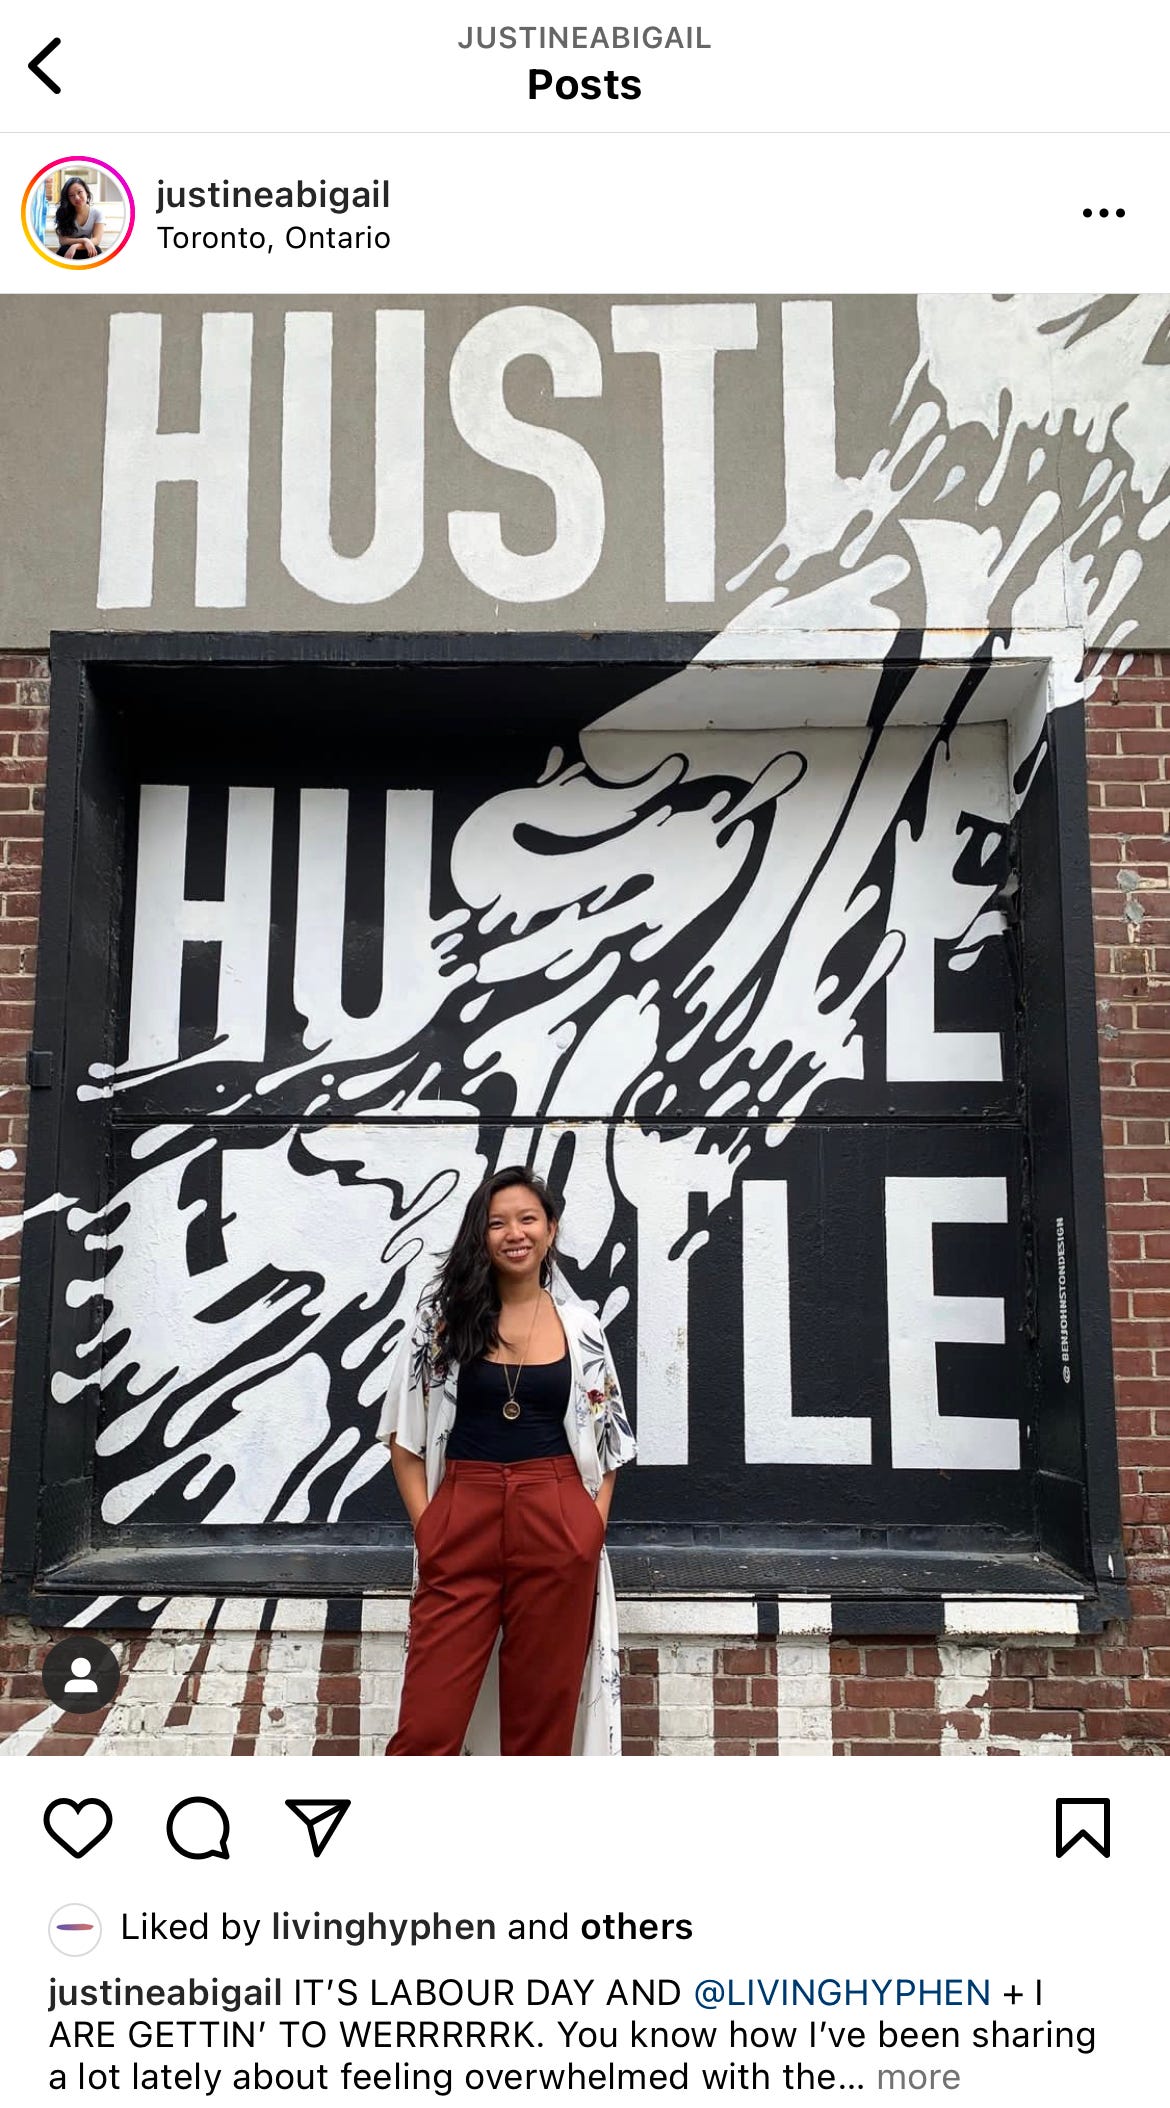 Justine standing in front of a mural that reads "HUSTLE HUSTLE HUSTLE"